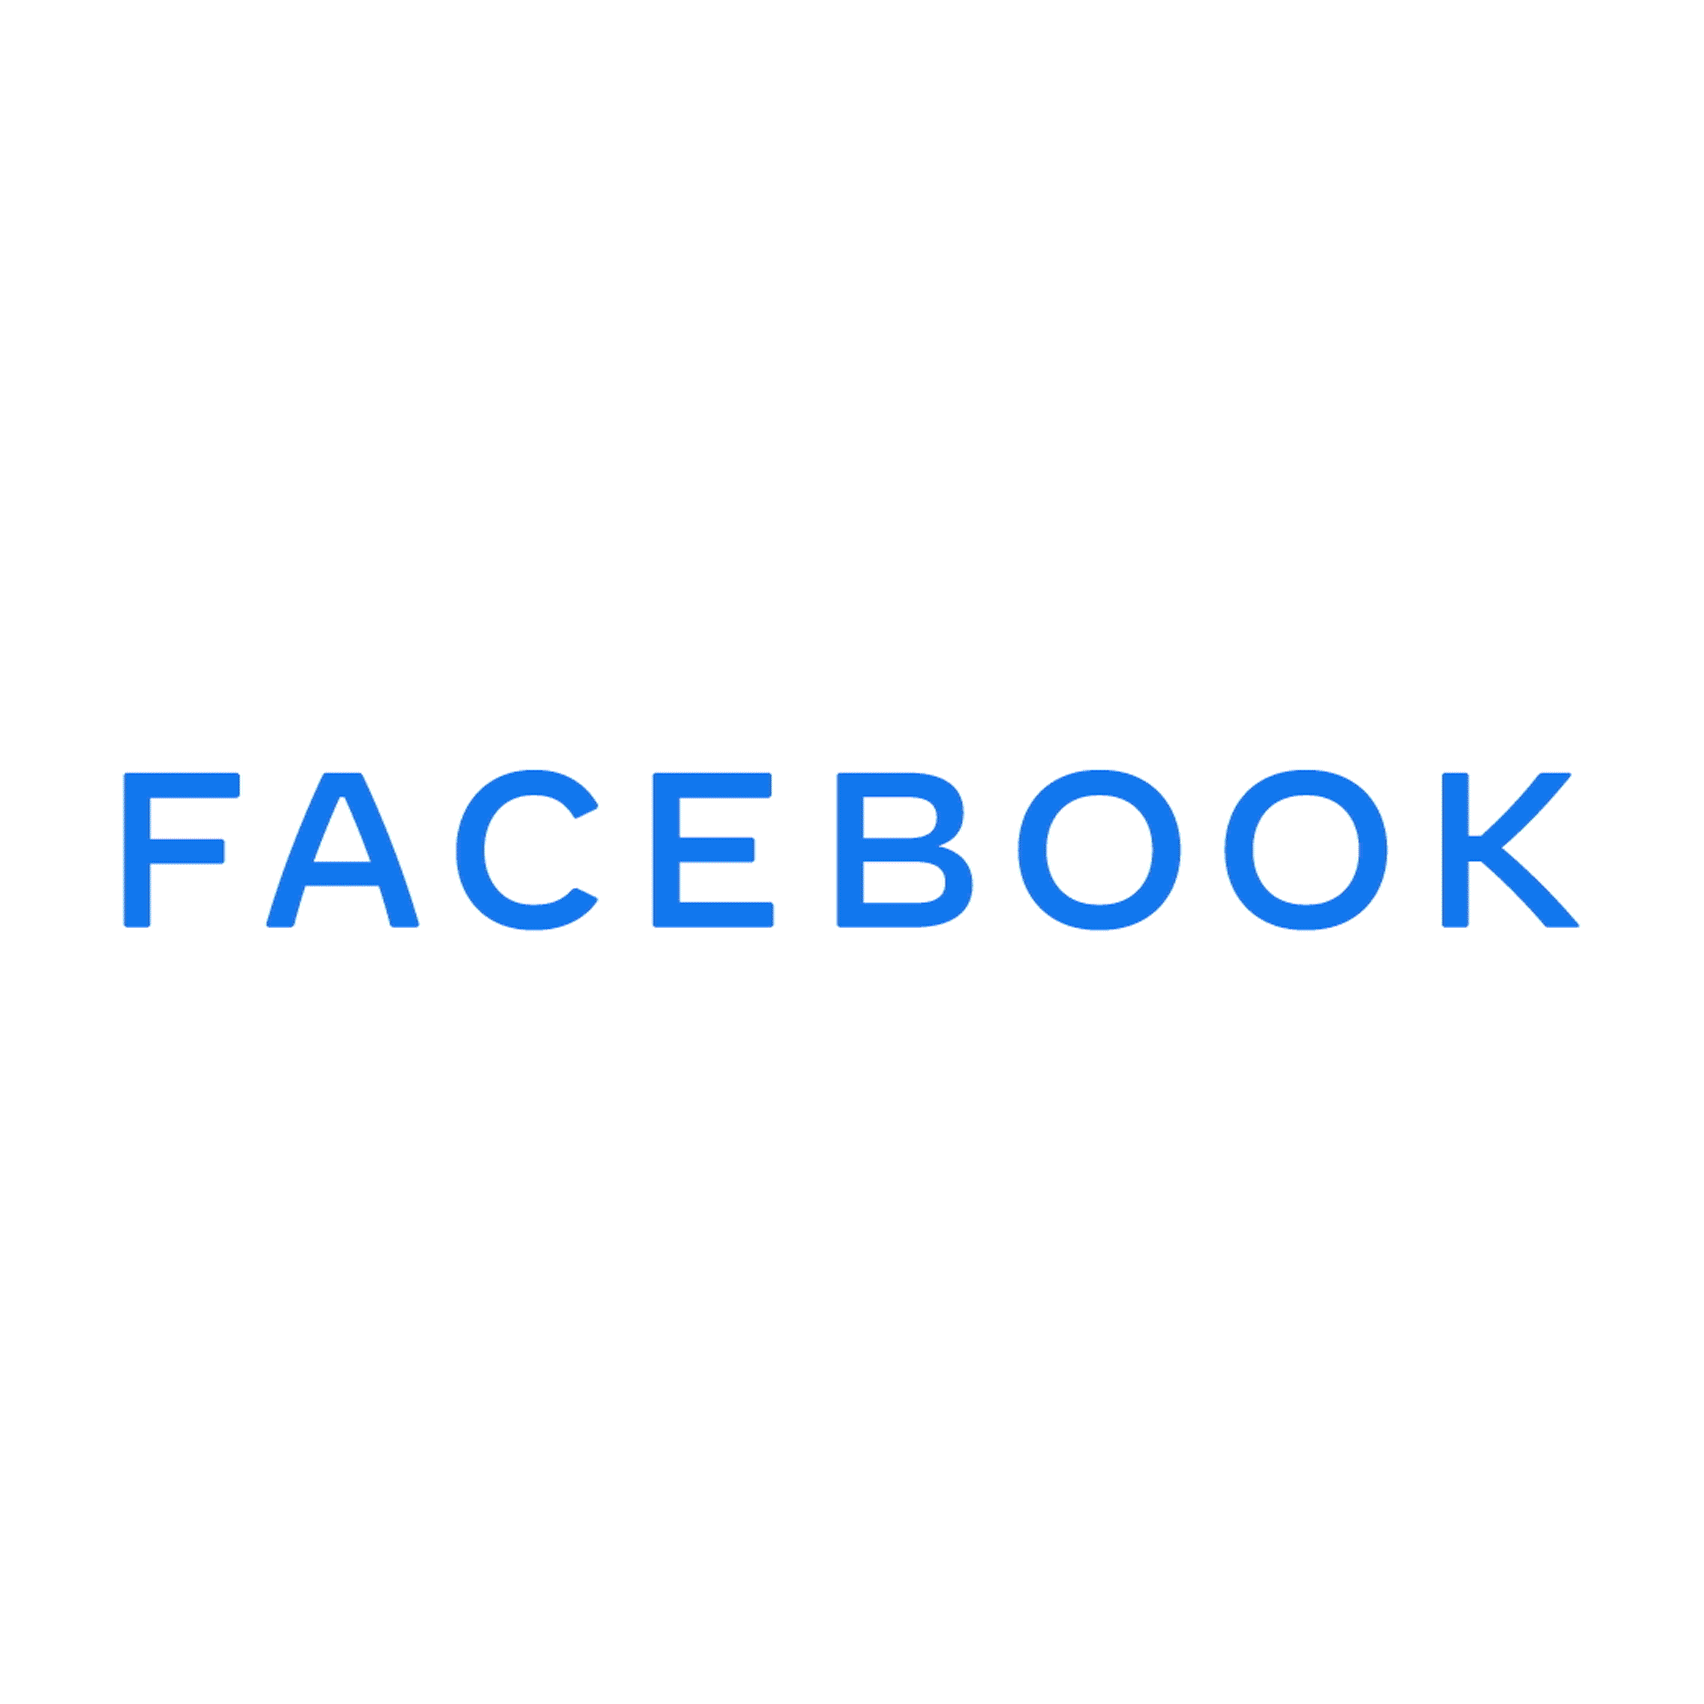 Facebook rebrands to "create visual distinction" between company and social app